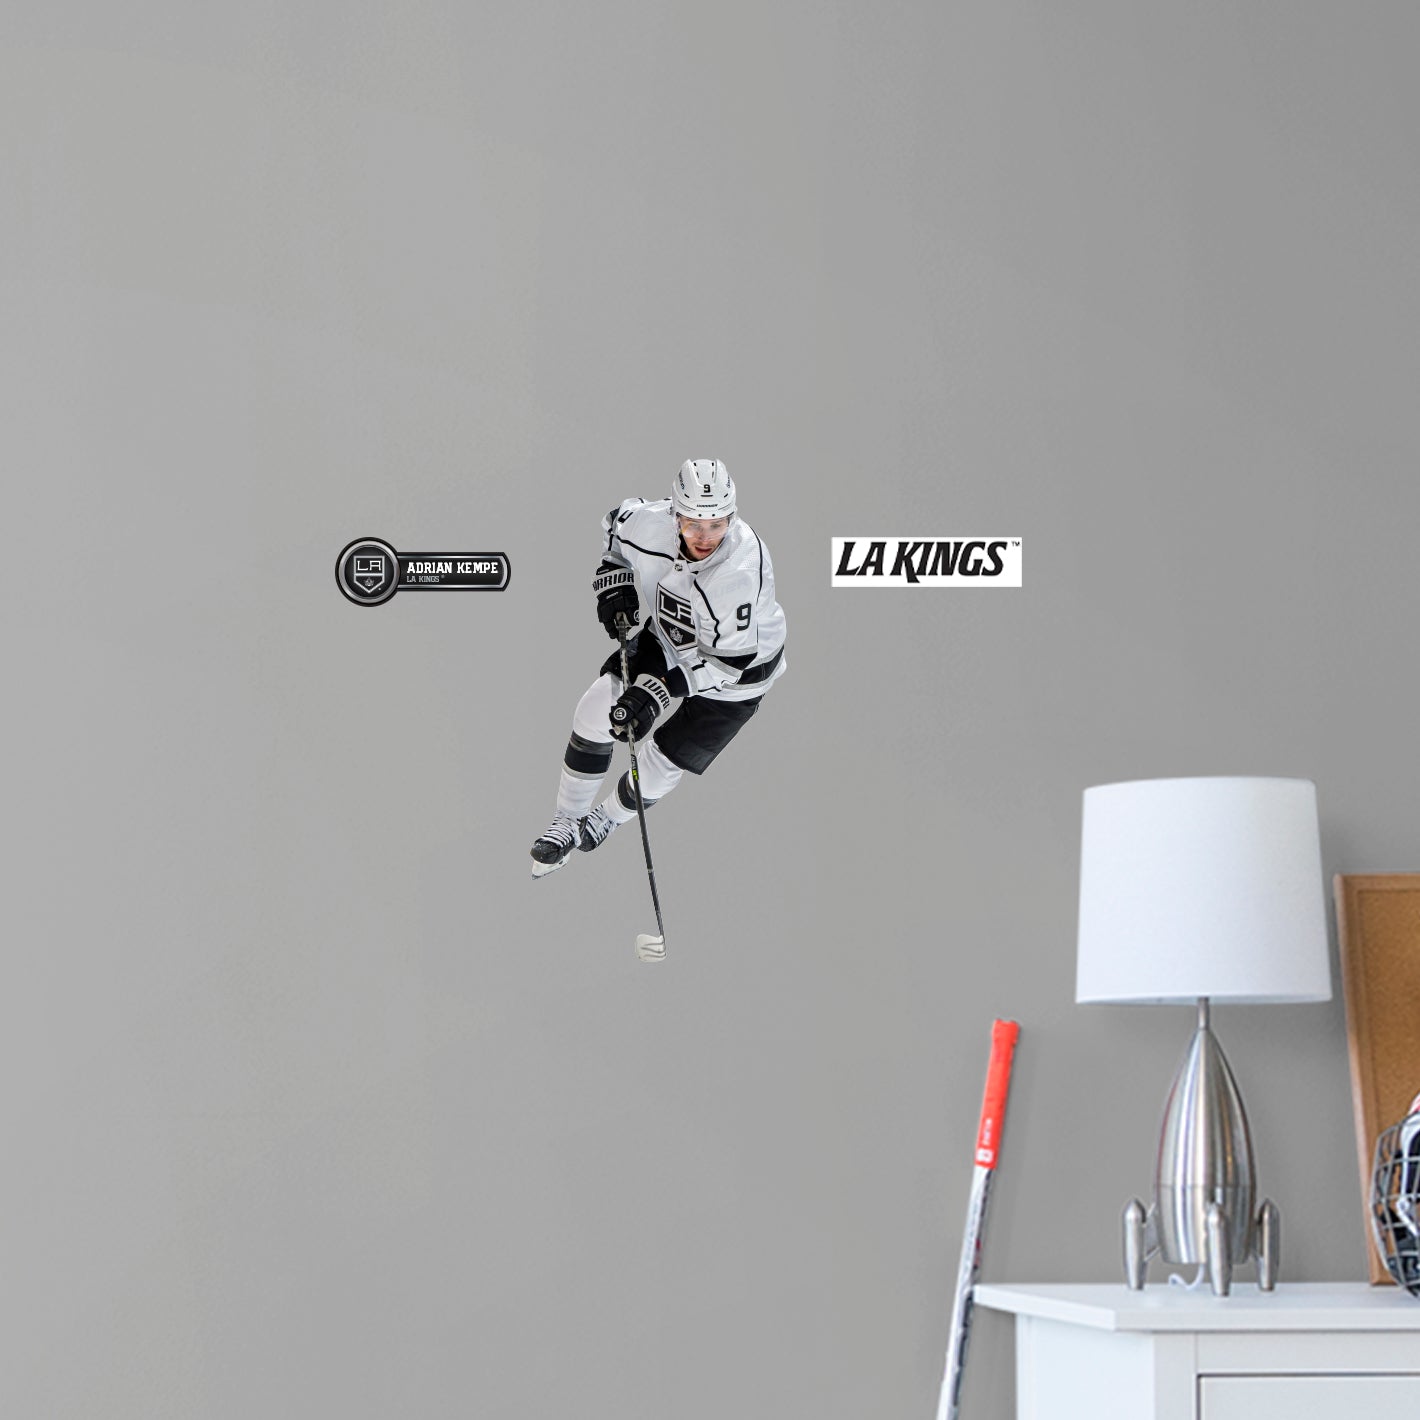 Los Angeles Kings: Adrian Kempe - Officially Licensed NHL Removable Adhesive Decal